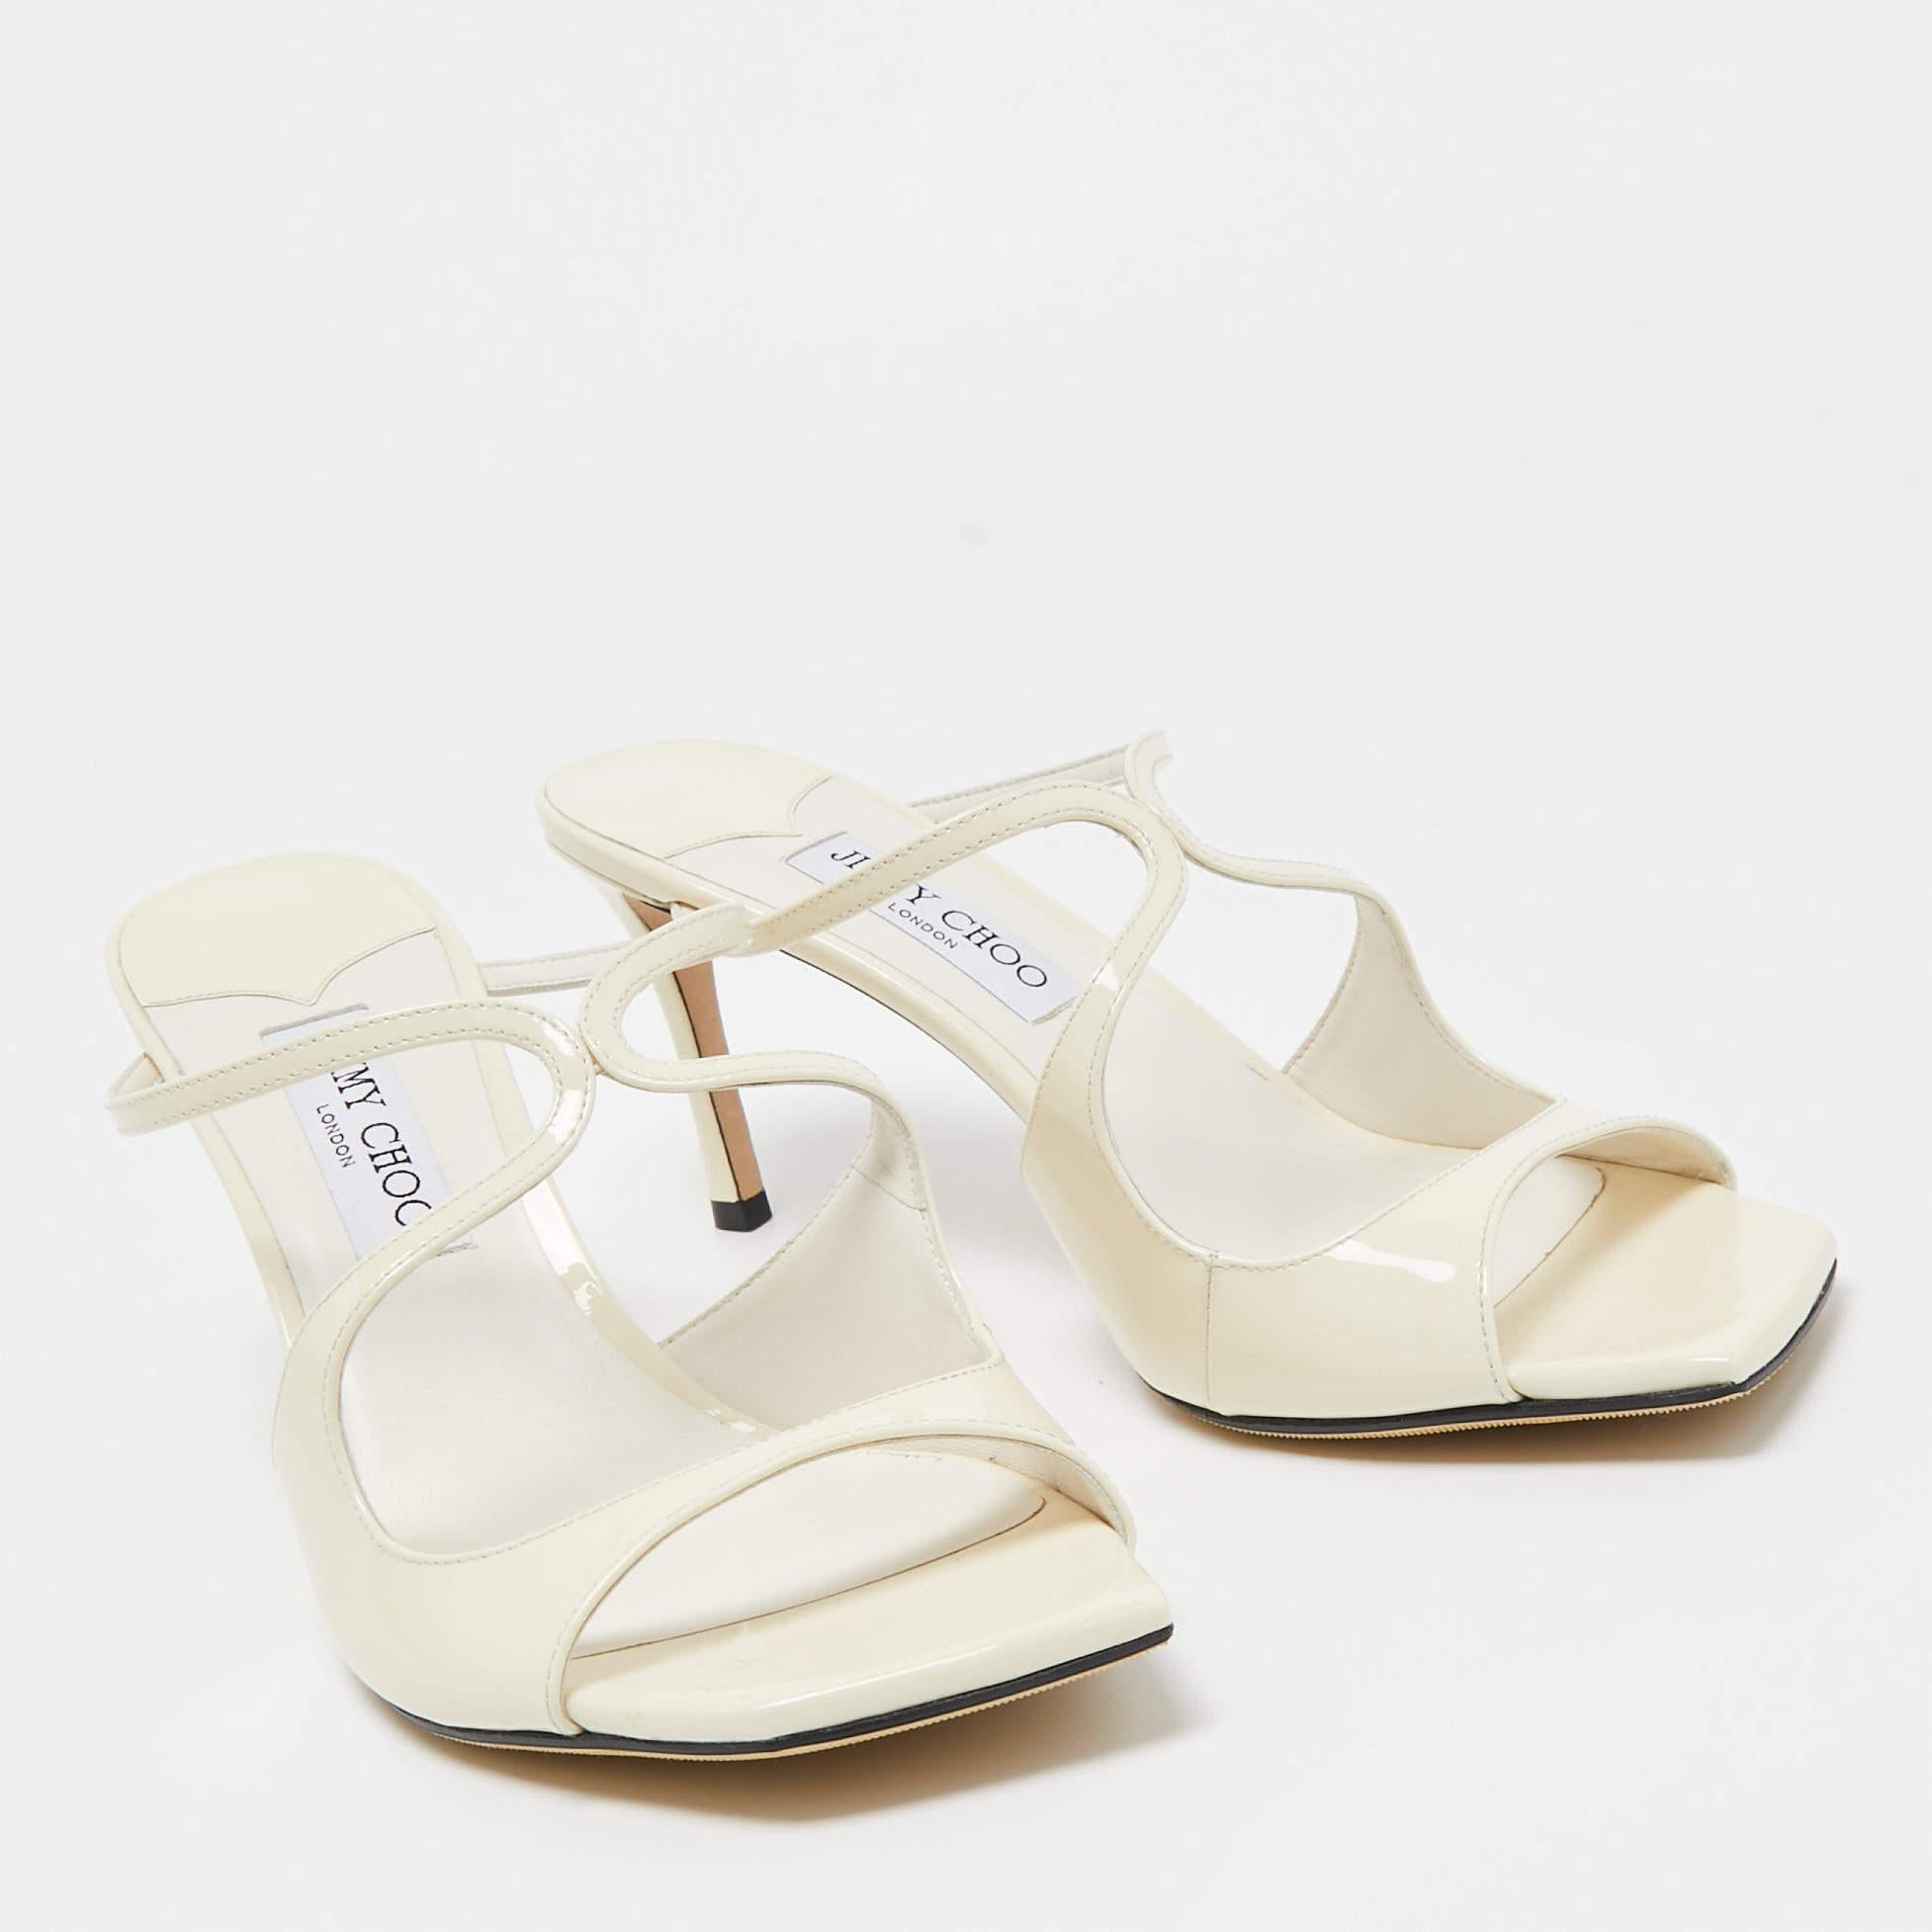 Jimmy Choo Off White Patent Leather Anise Sandals Size 42 1